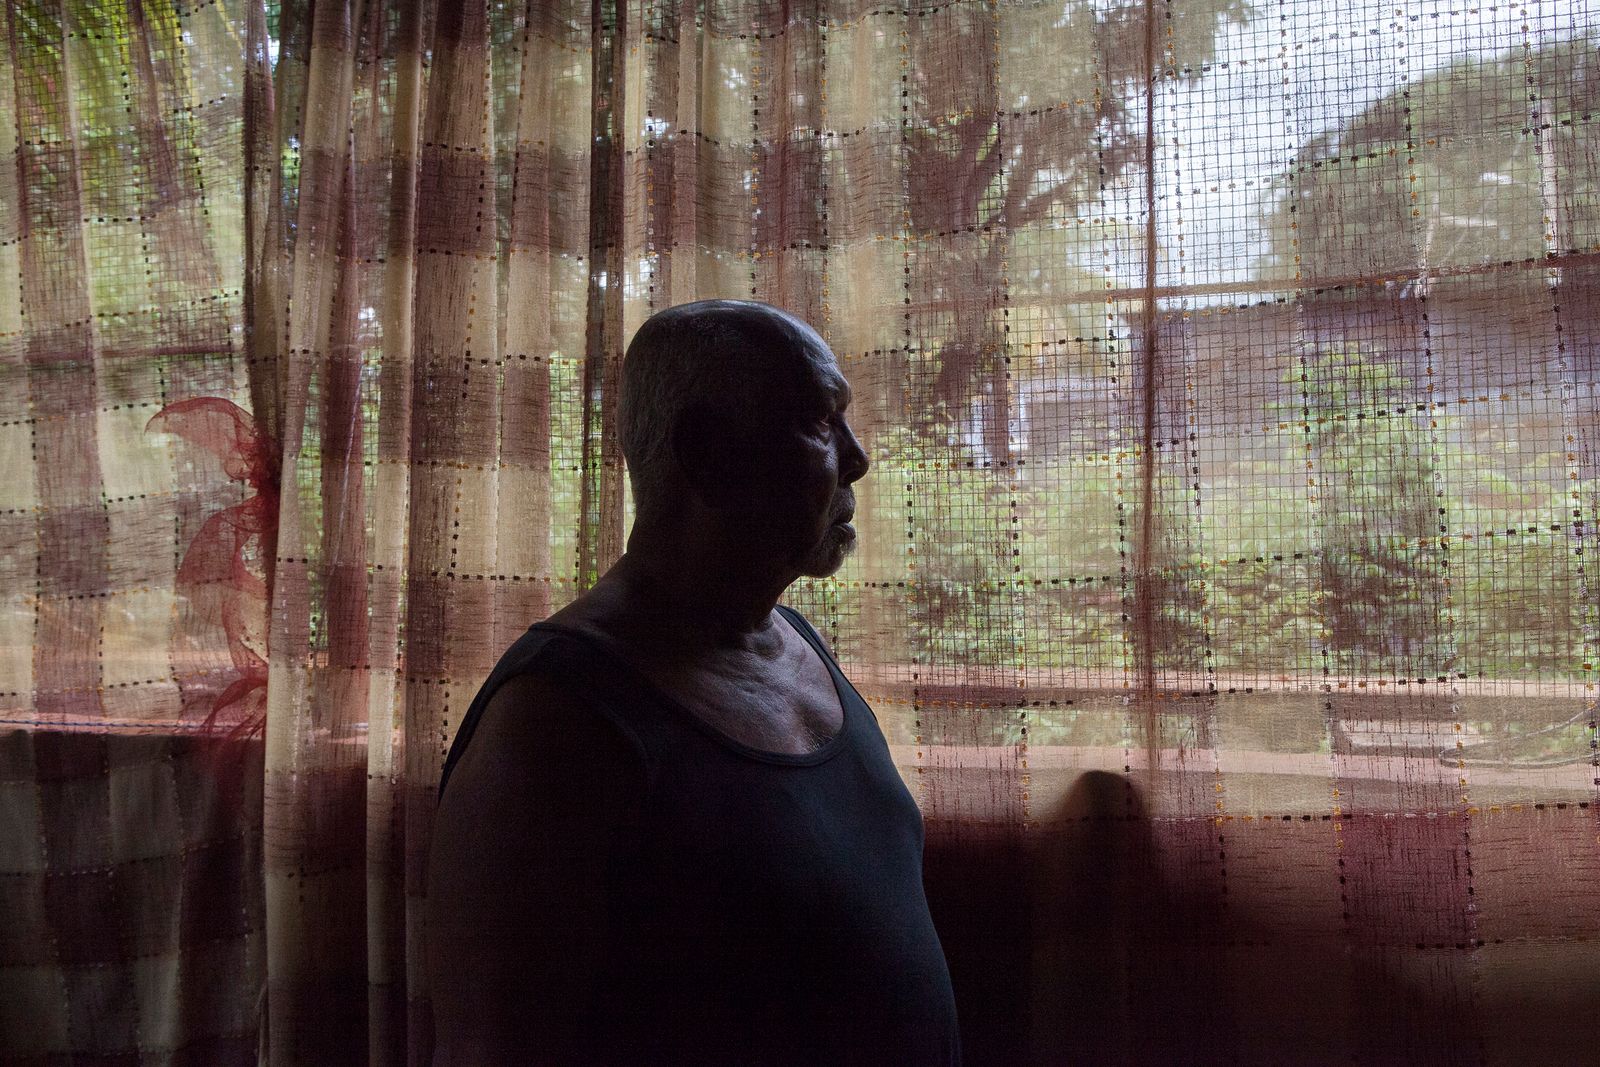 © Morgan Fache - Image from the Chagos: injustice towards the islands photography project